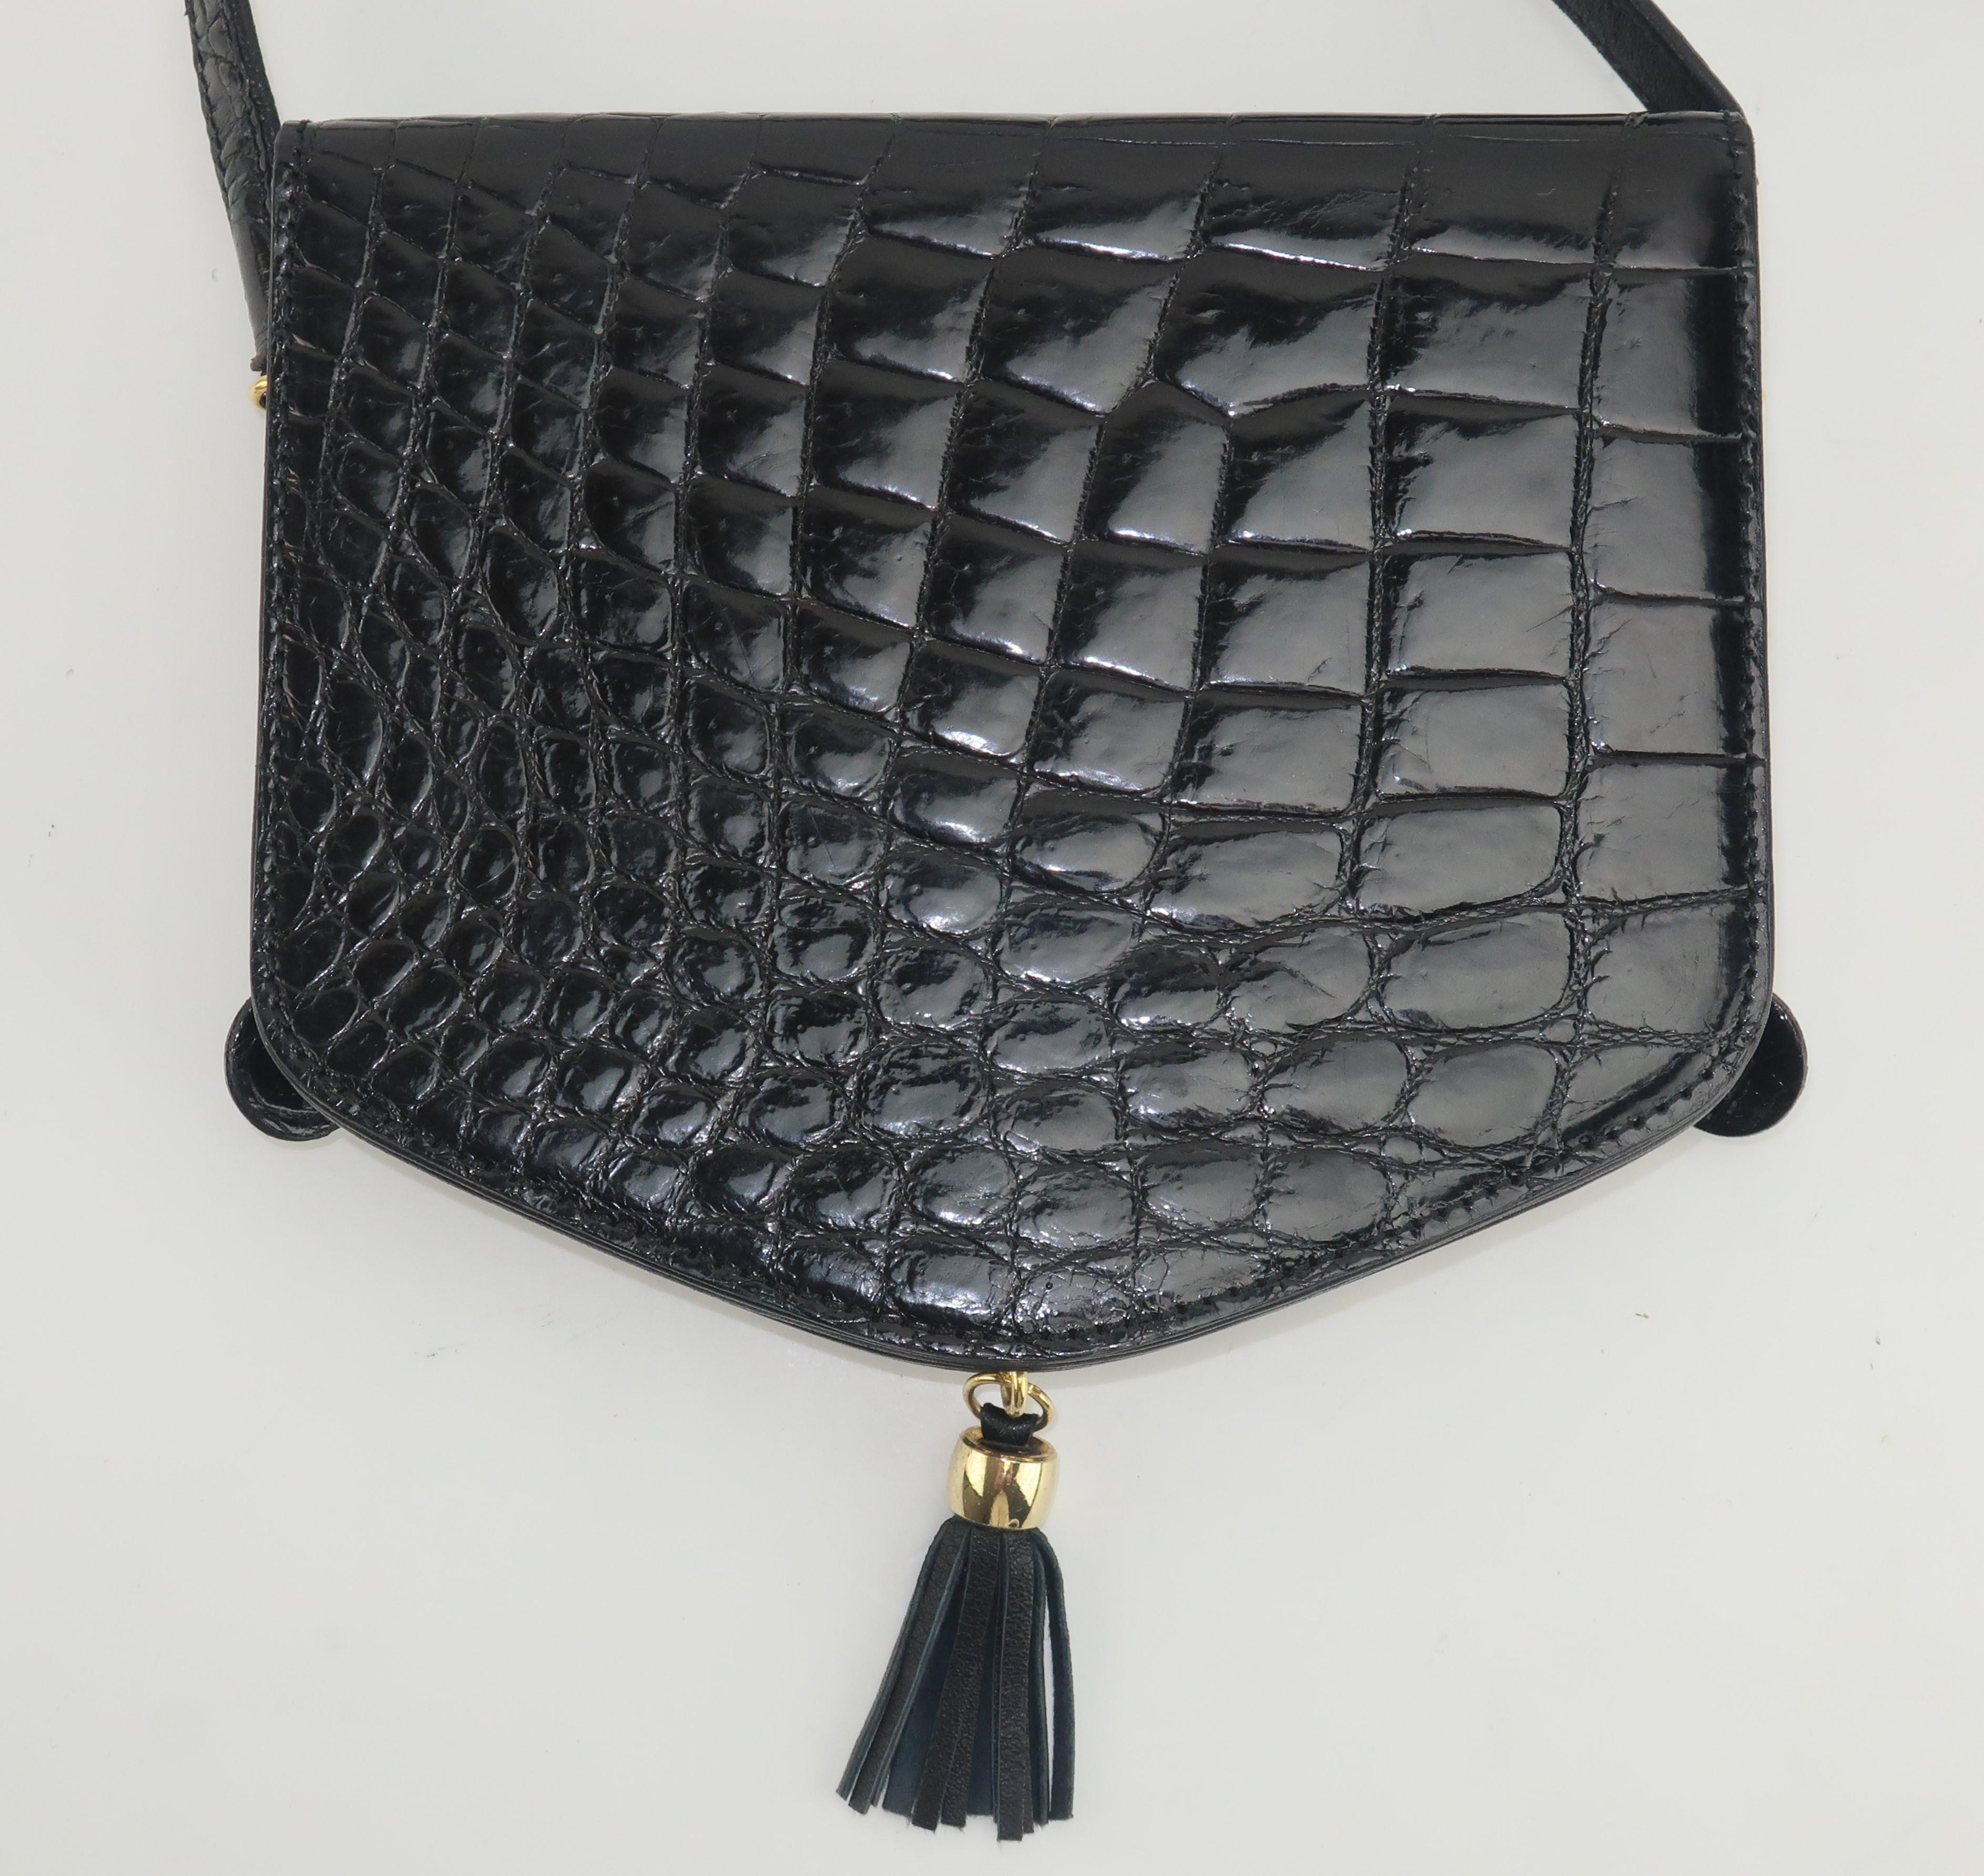 This Harrods black alligator embossed leather handbag offers a great combination of classic style and a chic look.  The body of the bag has a snap front flap closure with an extra long shoulder strap appropriate for cross body wear.  Gold tone metal